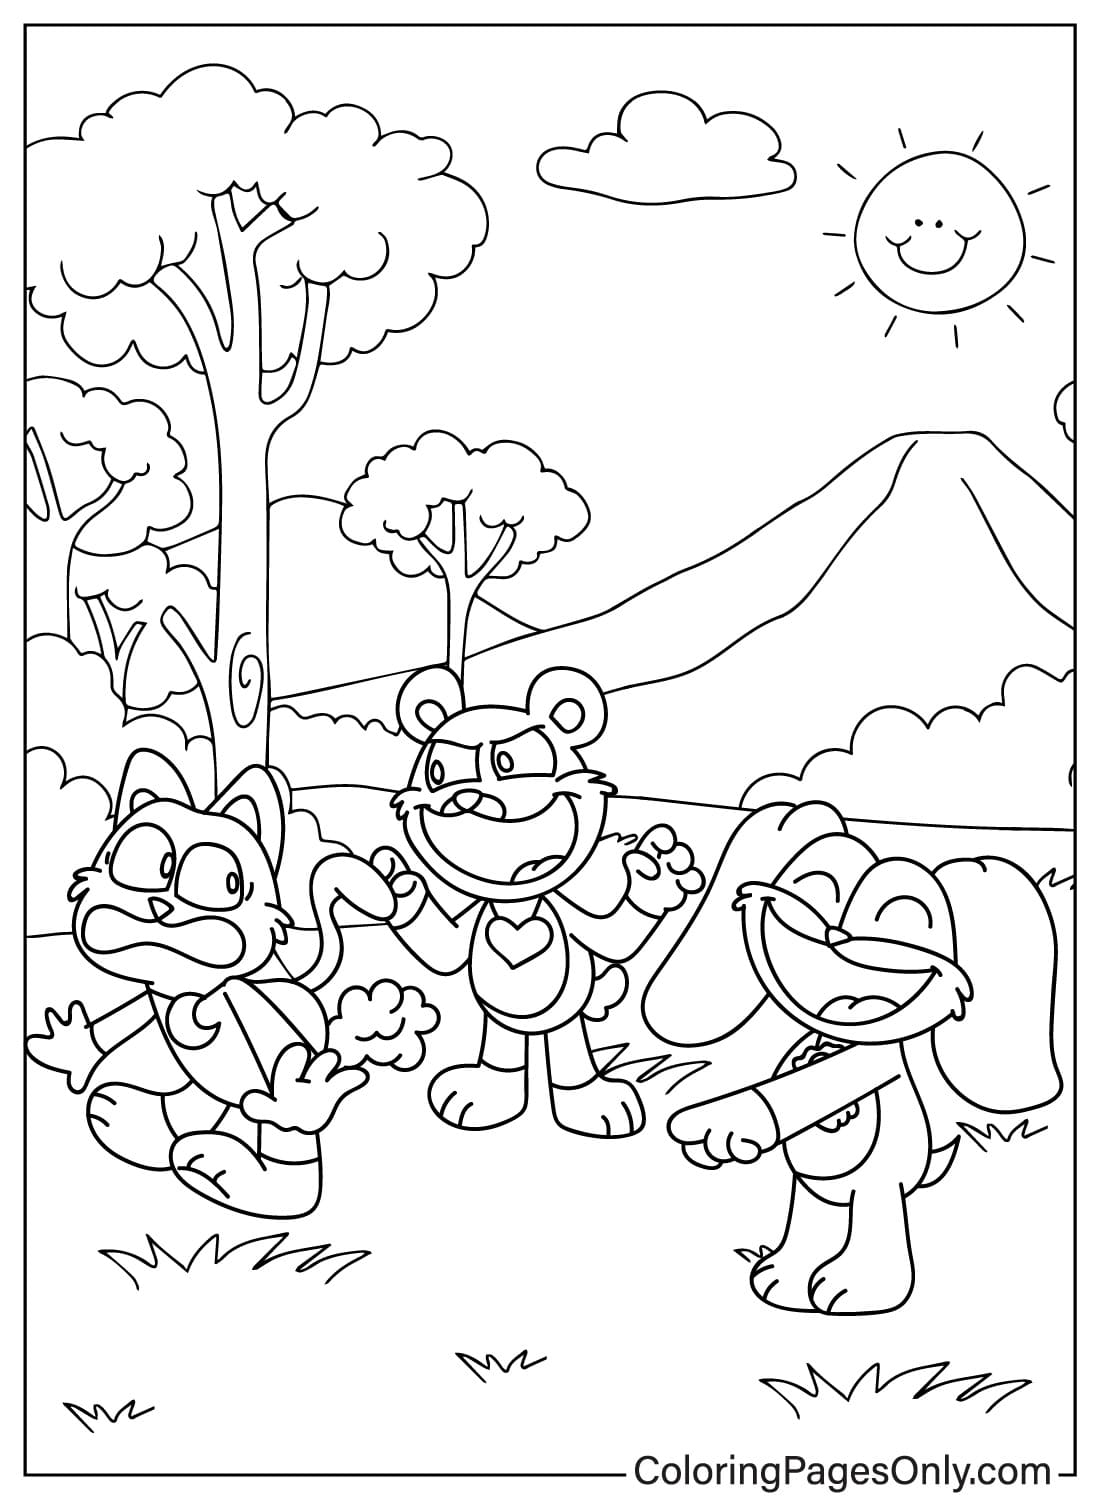 Bobby BearHug, CatNap and DogDay Coloring Page from DogDay